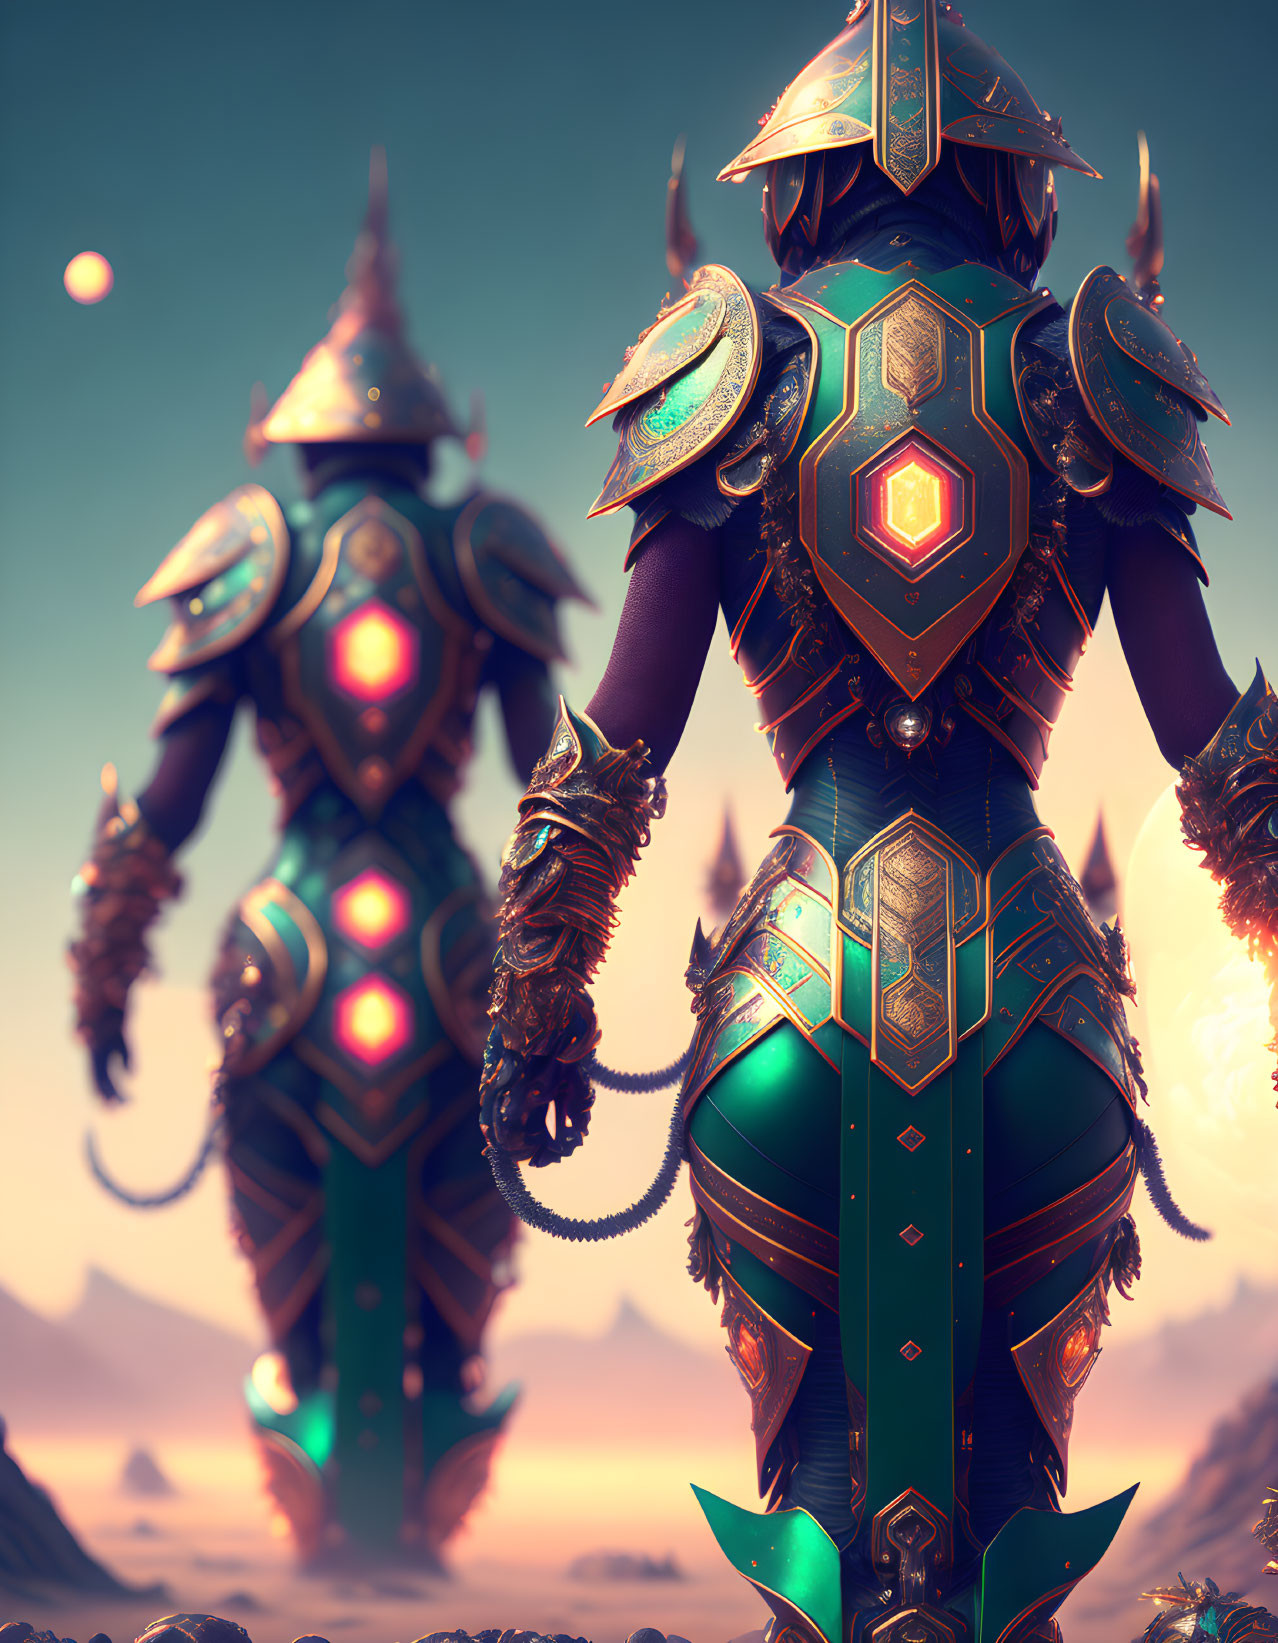 Armored figures with glowing gemstones in dusky sky